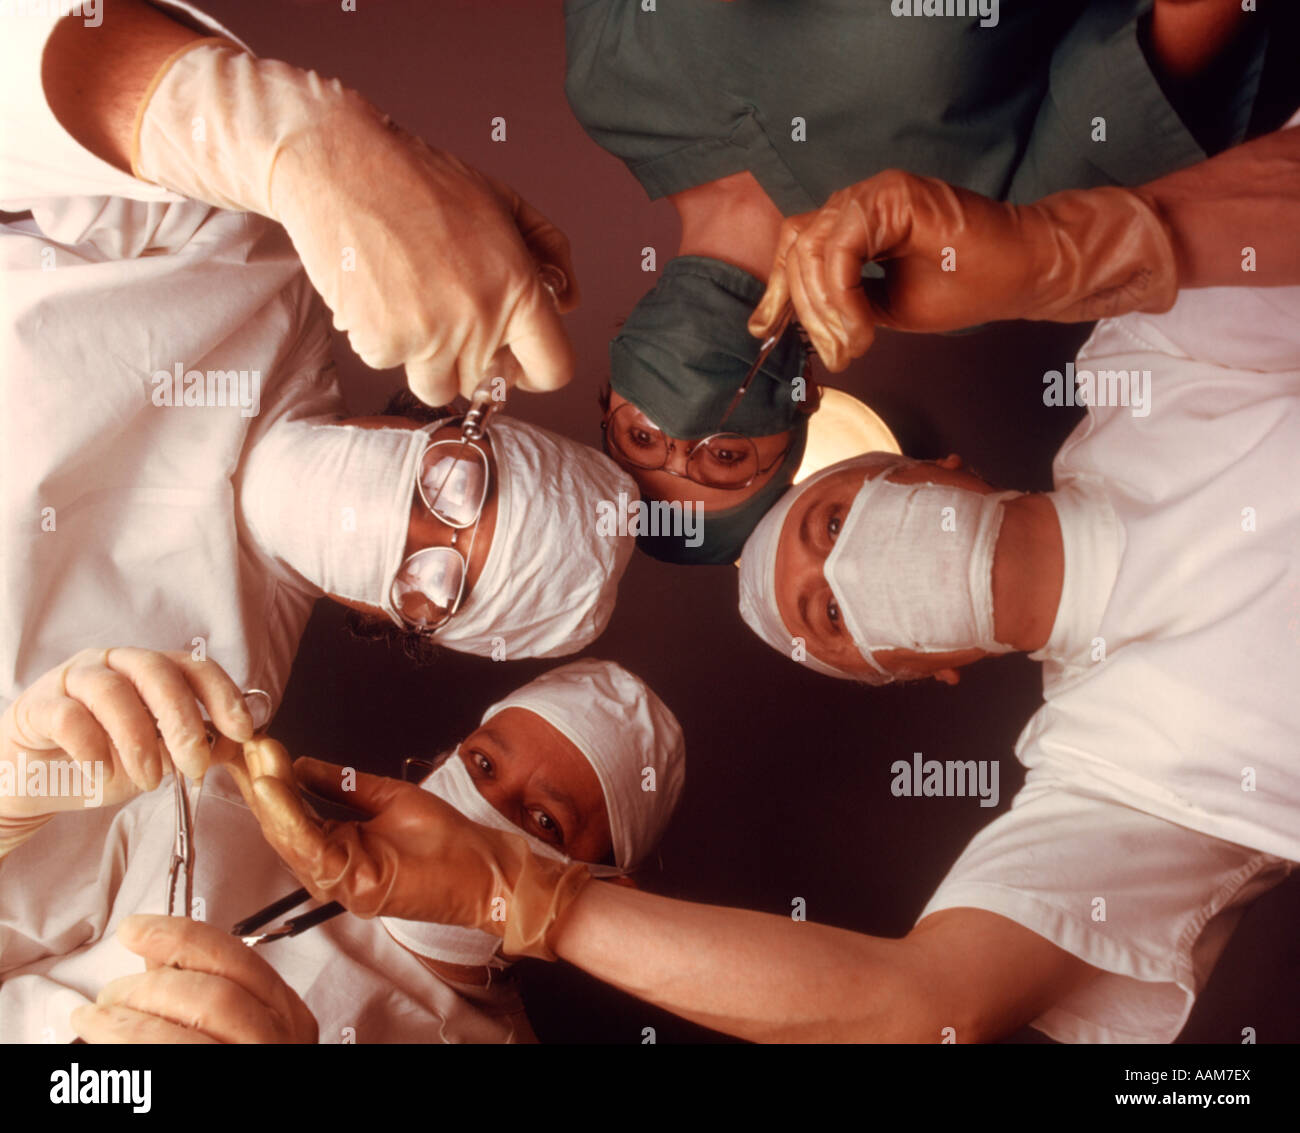 1970 1970s 4 PERSON SURGICAL TEAM FROM BELOW PATIENT POINT OF VIEW DOCTOR NURSE SURGEON DOCTORS SURGERY OPERATION Stock Photo